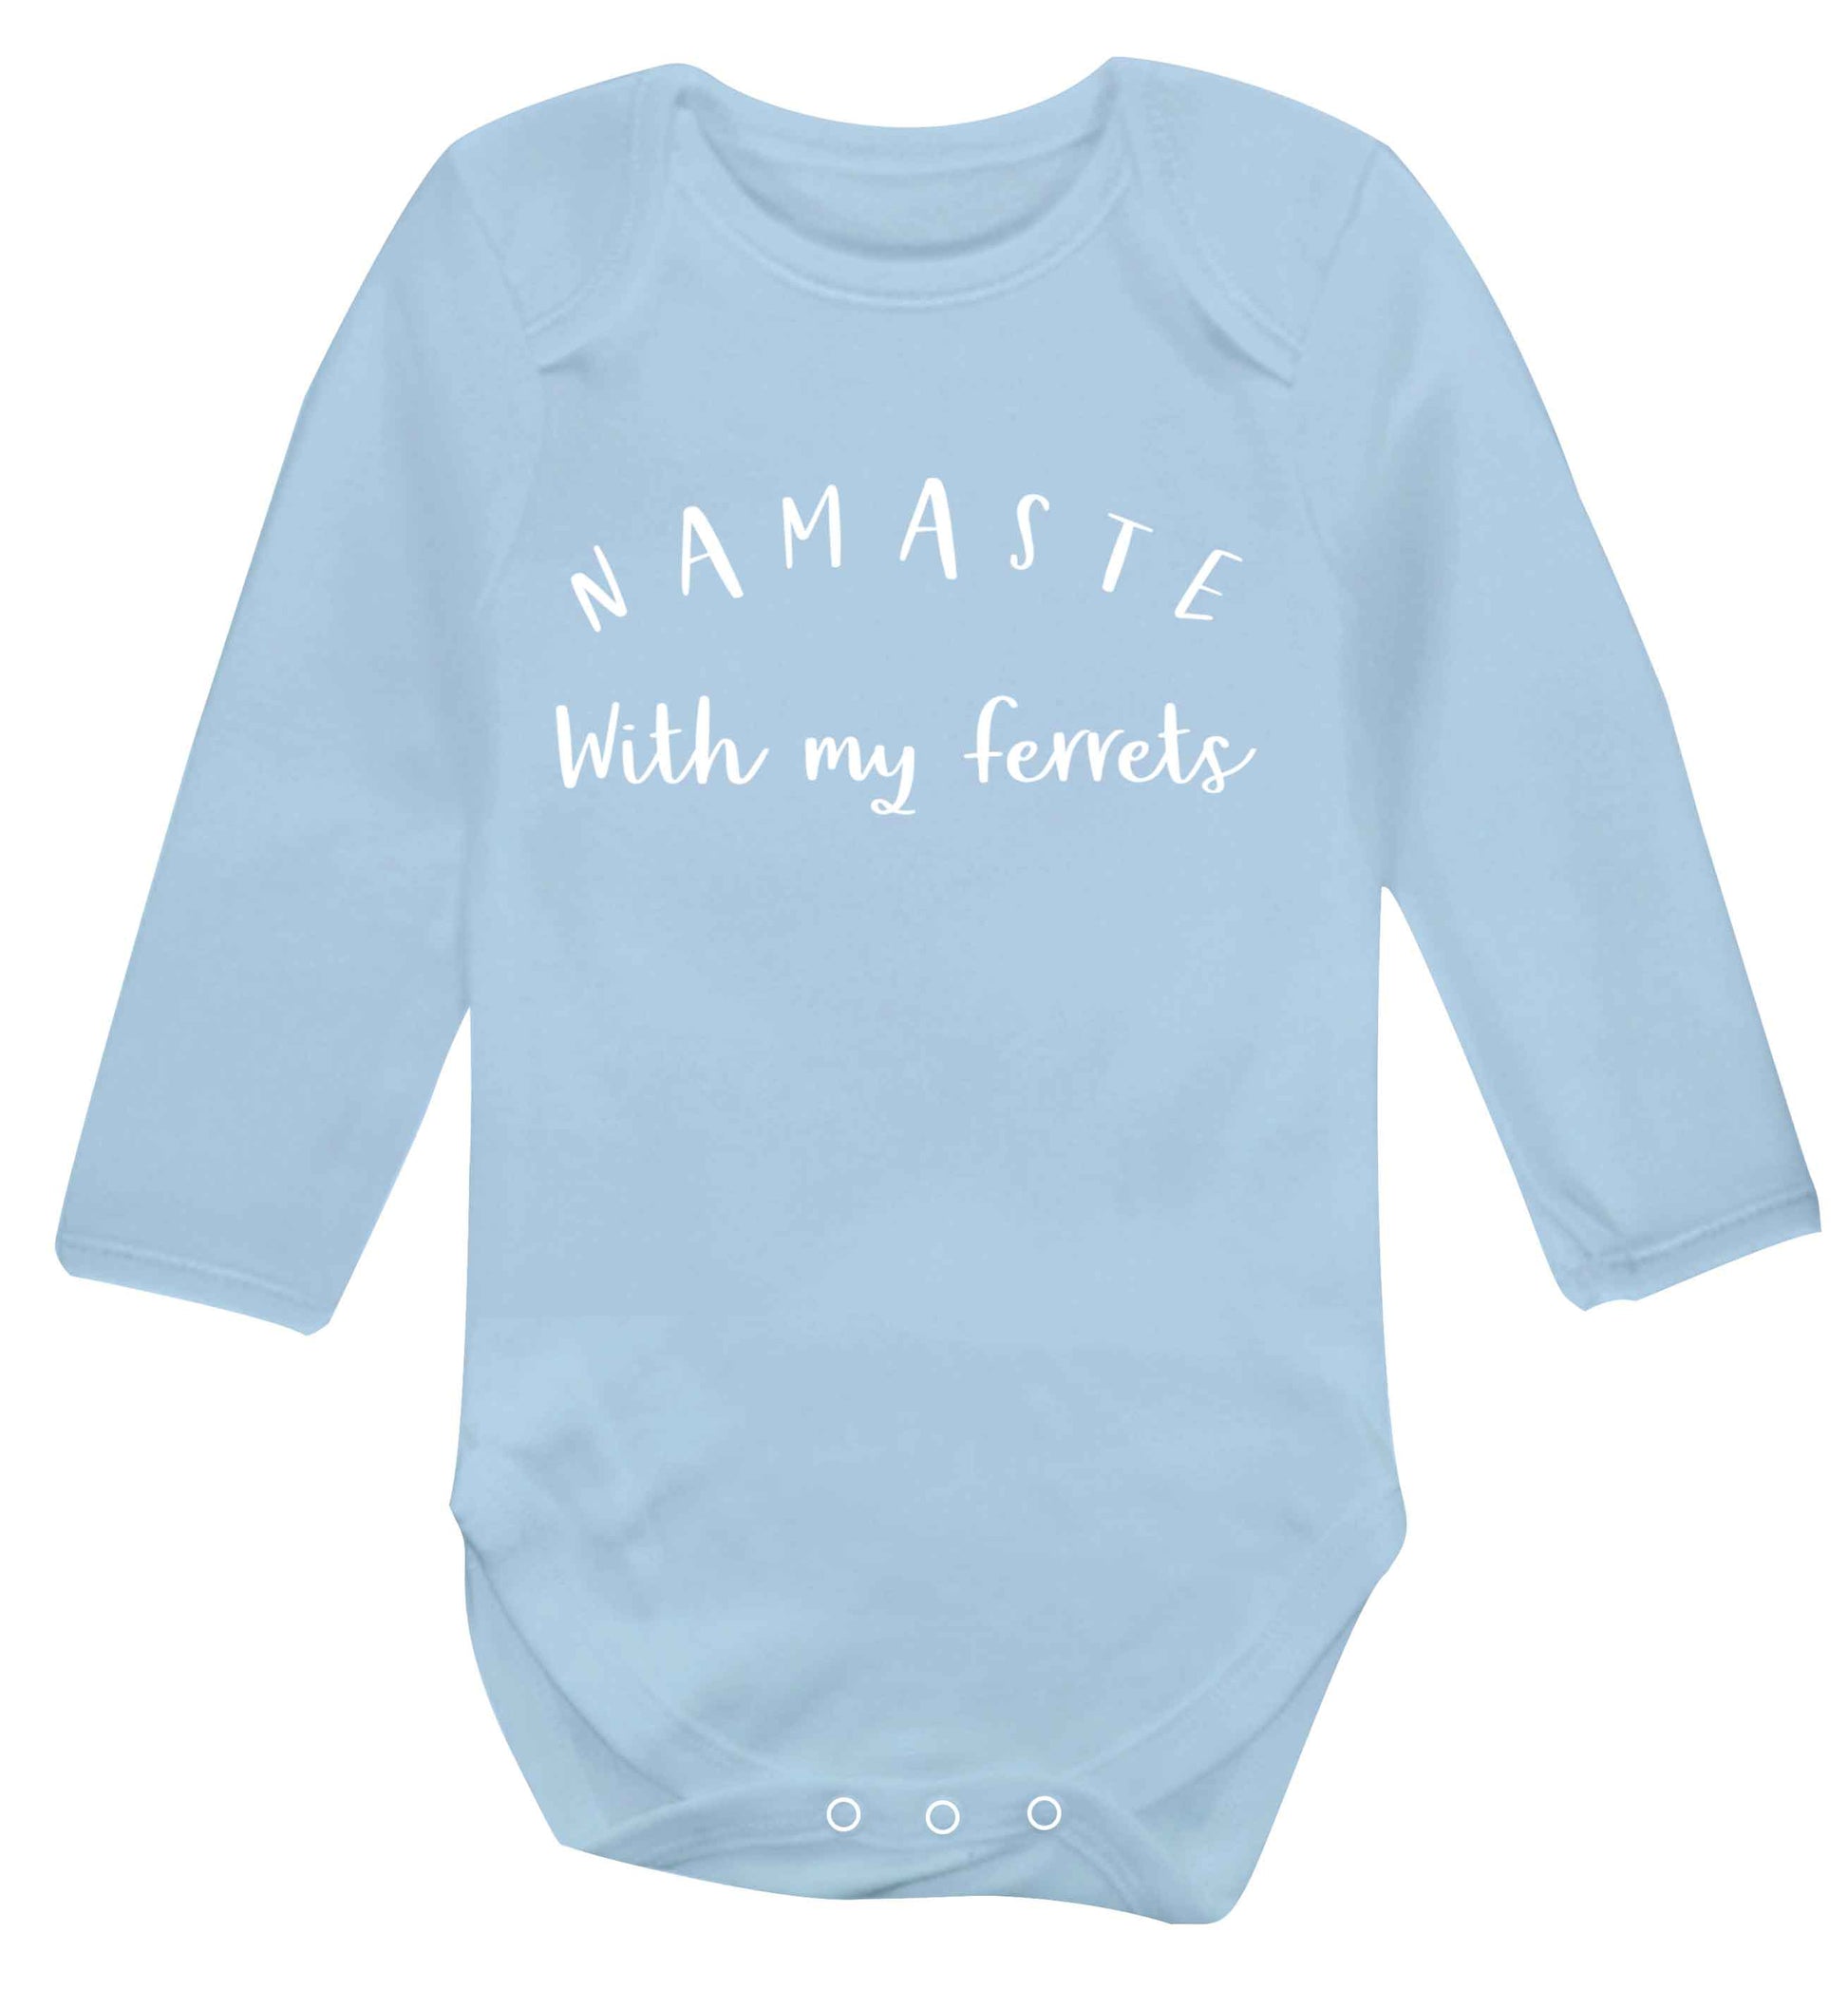 Namaste with my ferrets Baby Vest long sleeved pale blue 6-12 months